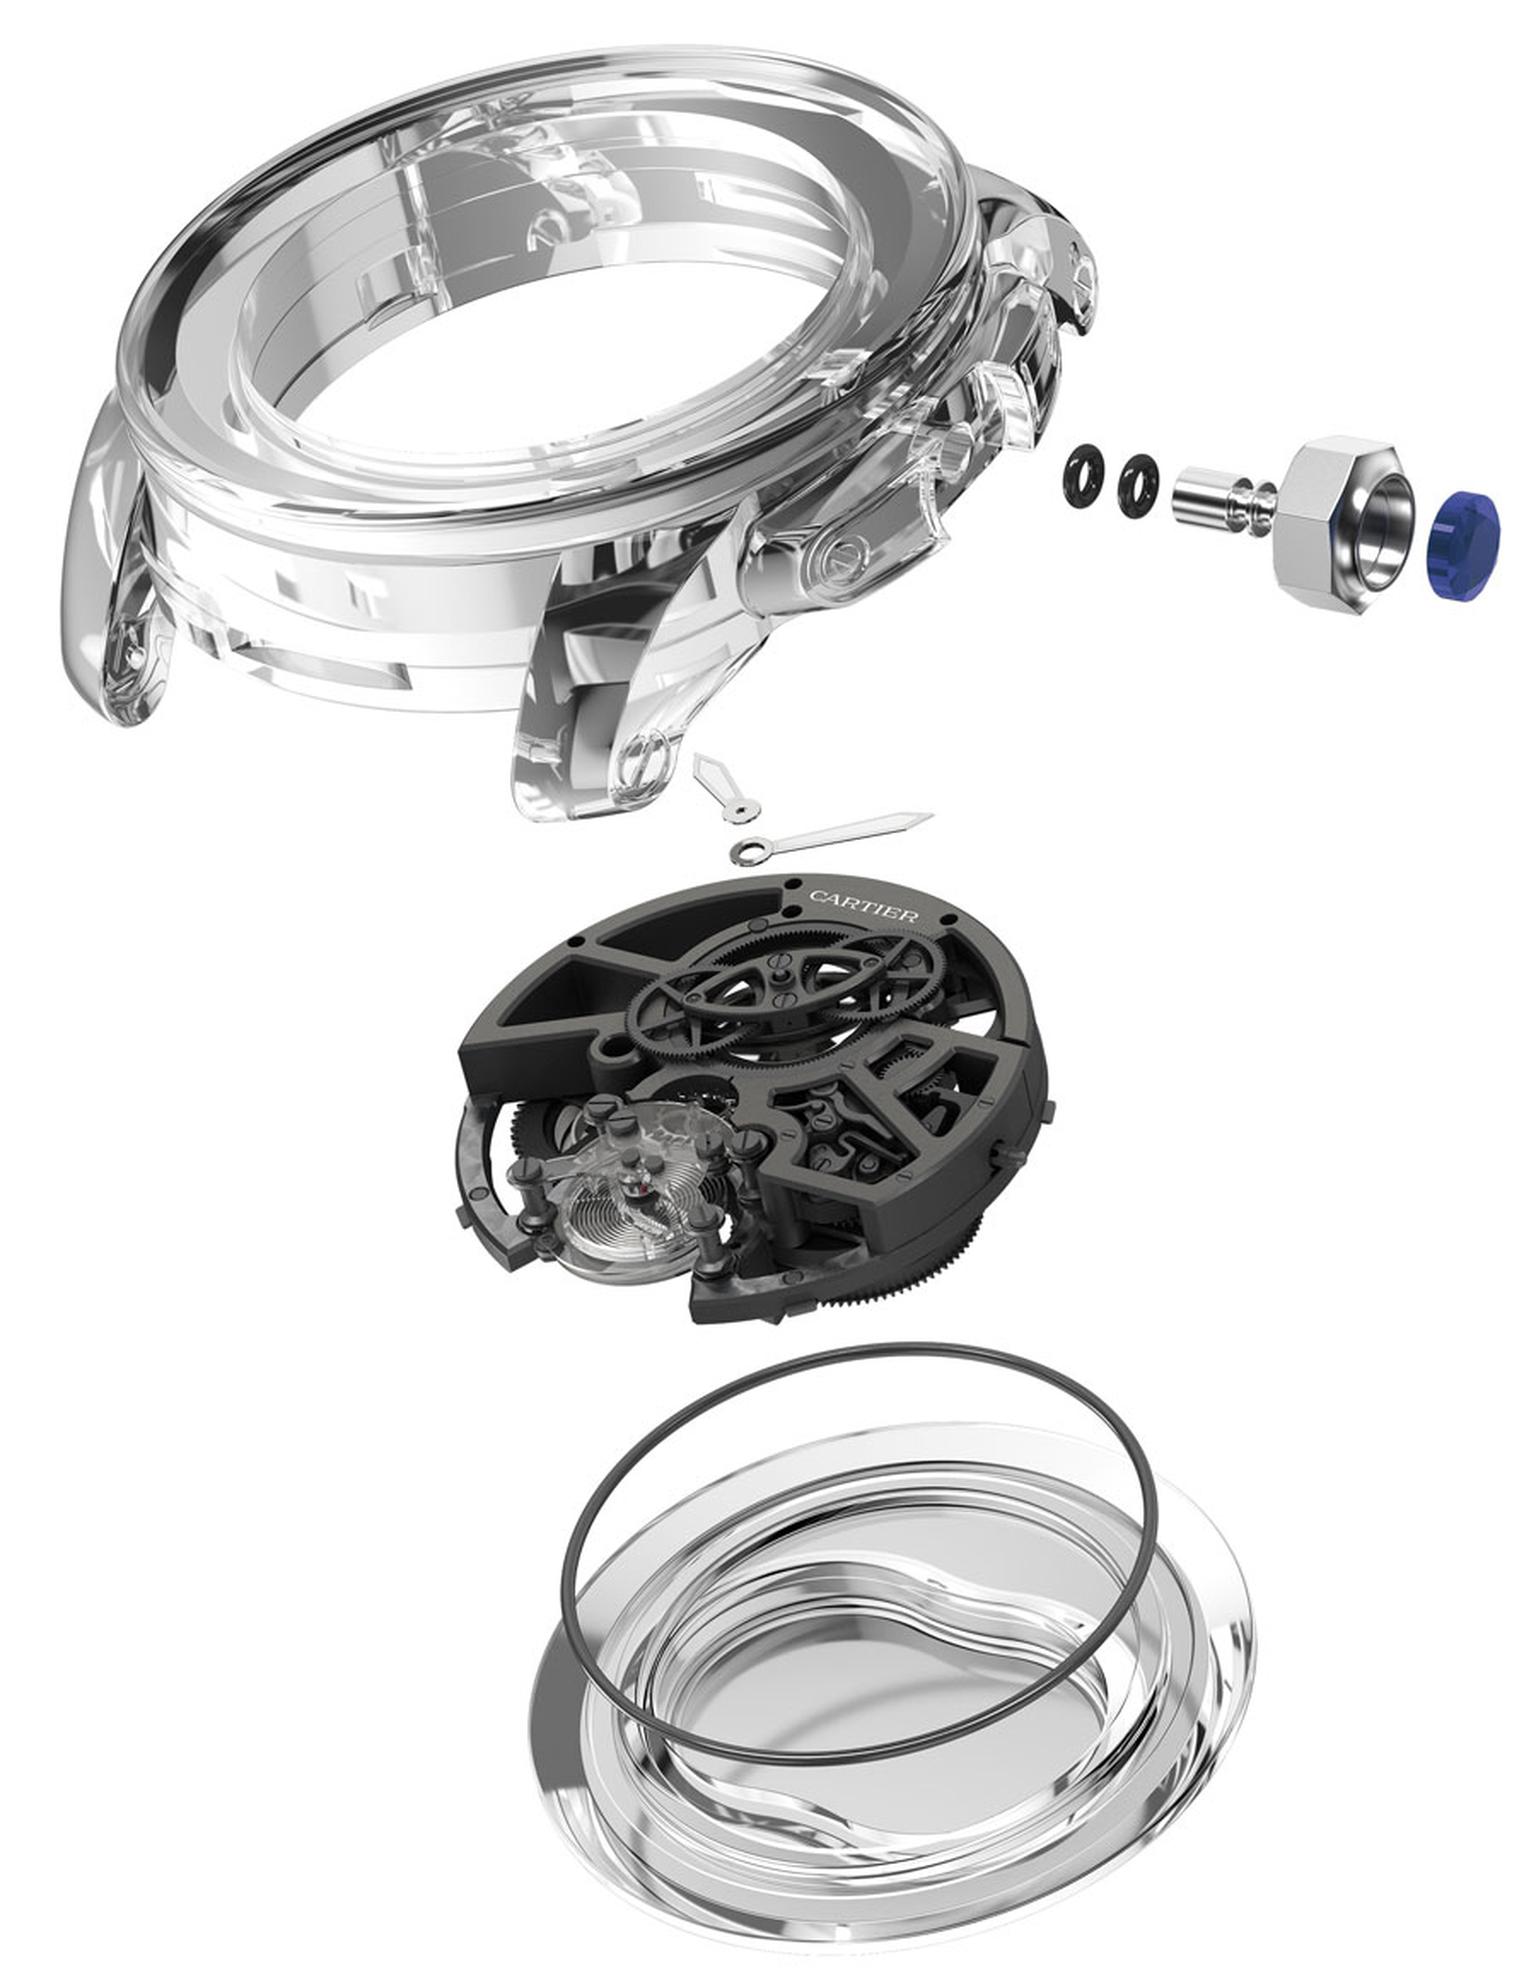 Cartier-ID-two-parts.jpg